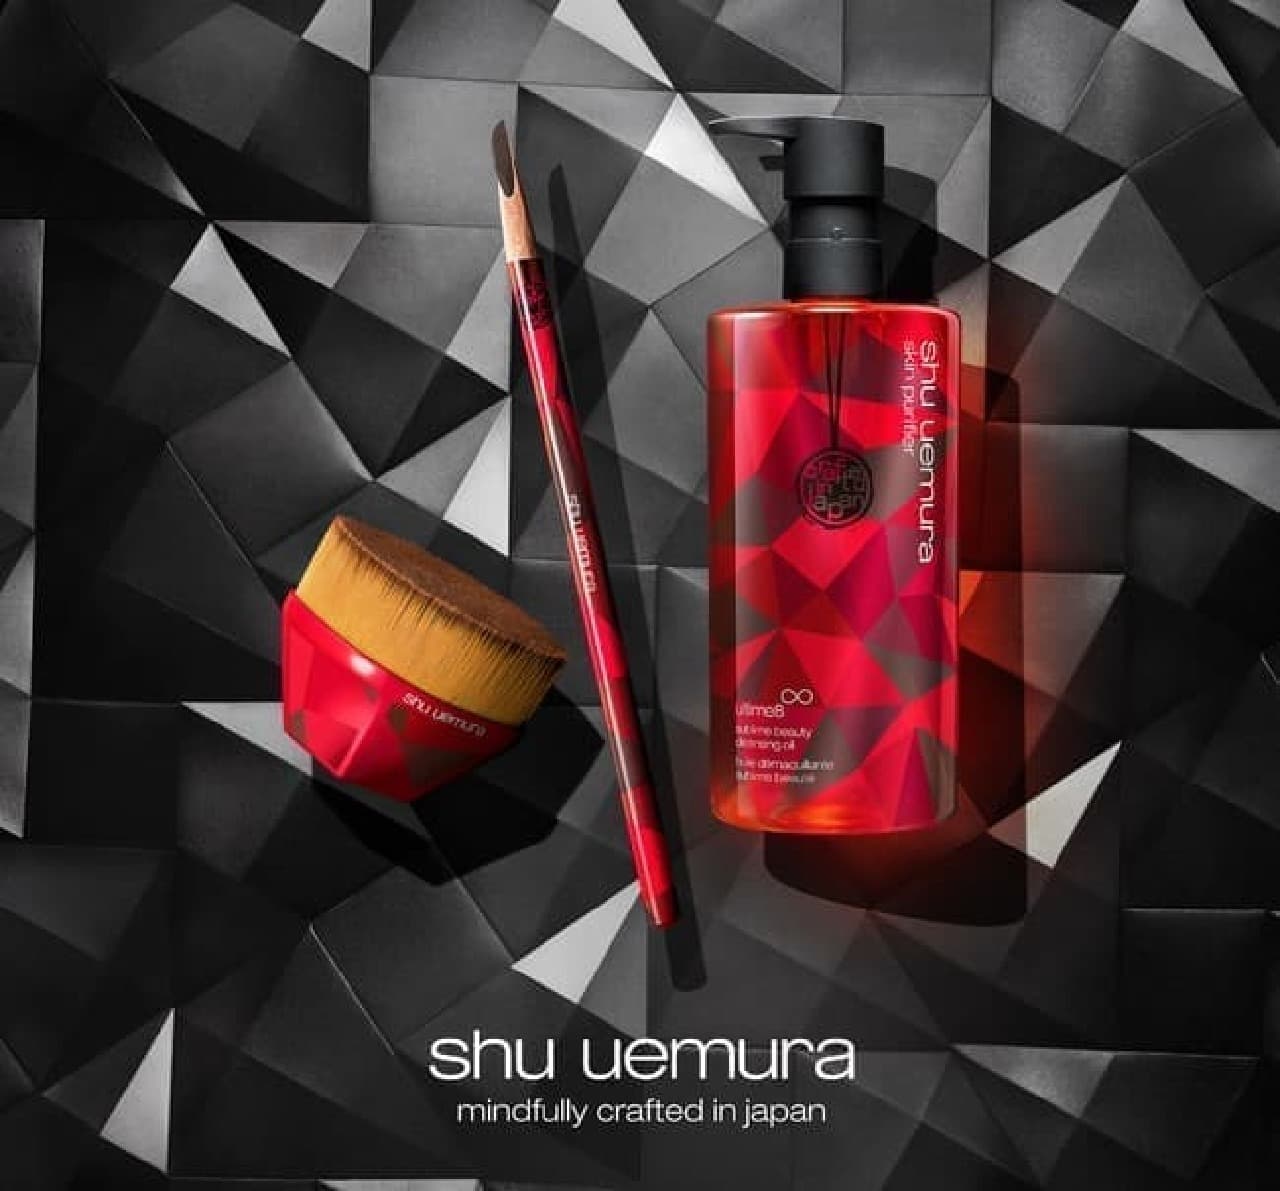 Shu Uemura "Mind Free Crafted in Japan Collection"